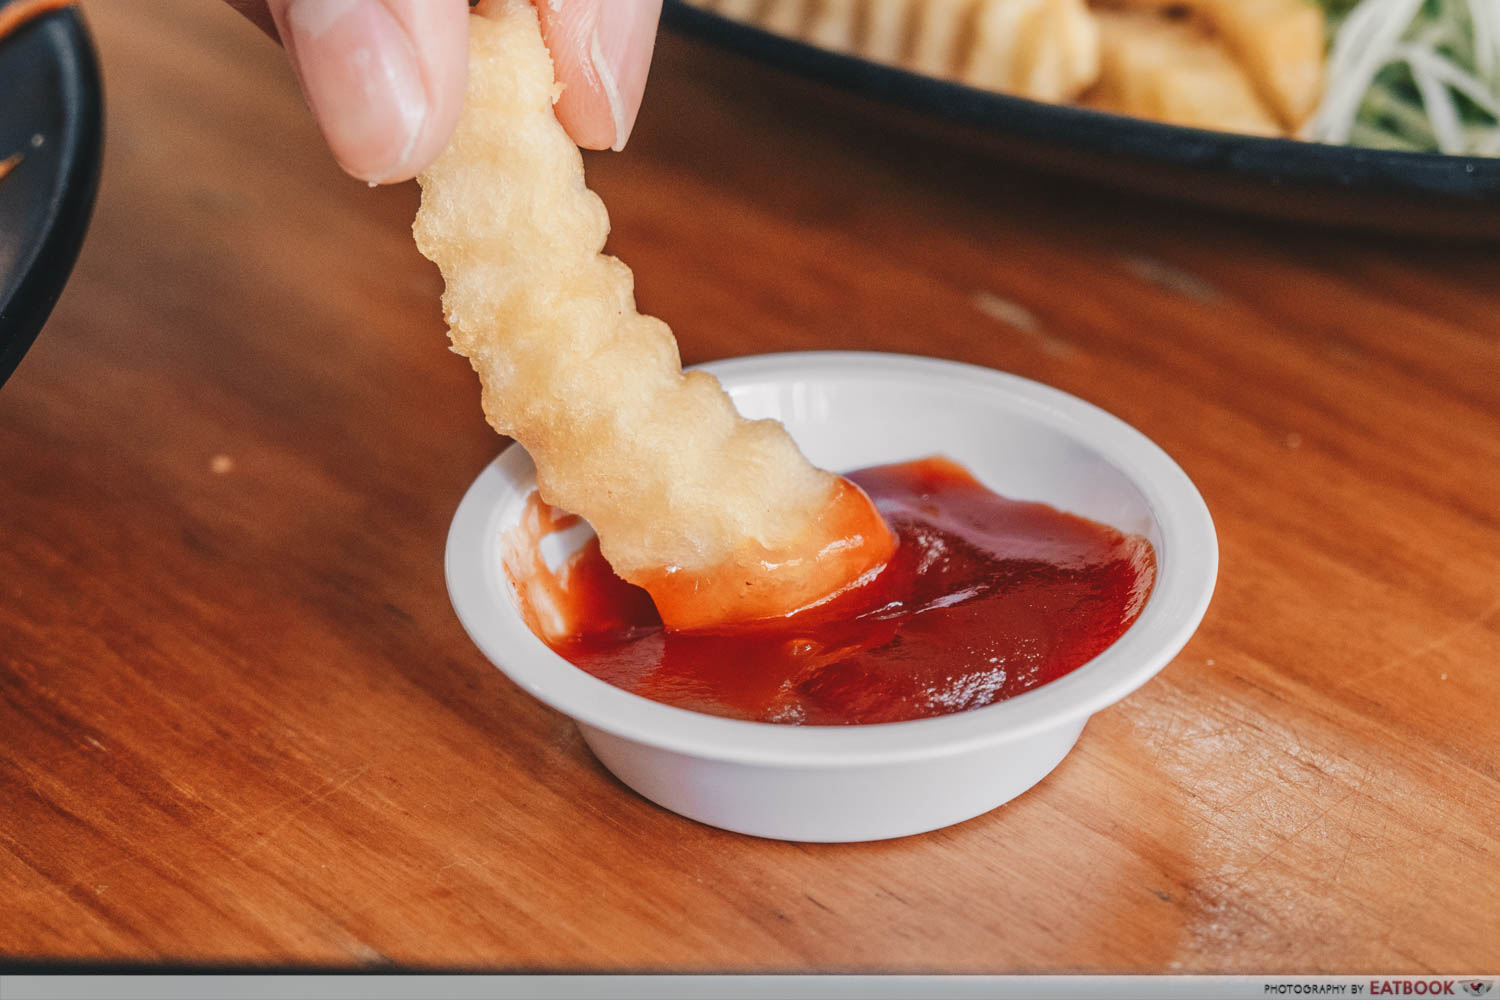 Skinny Chef - Fries dipped in sauce